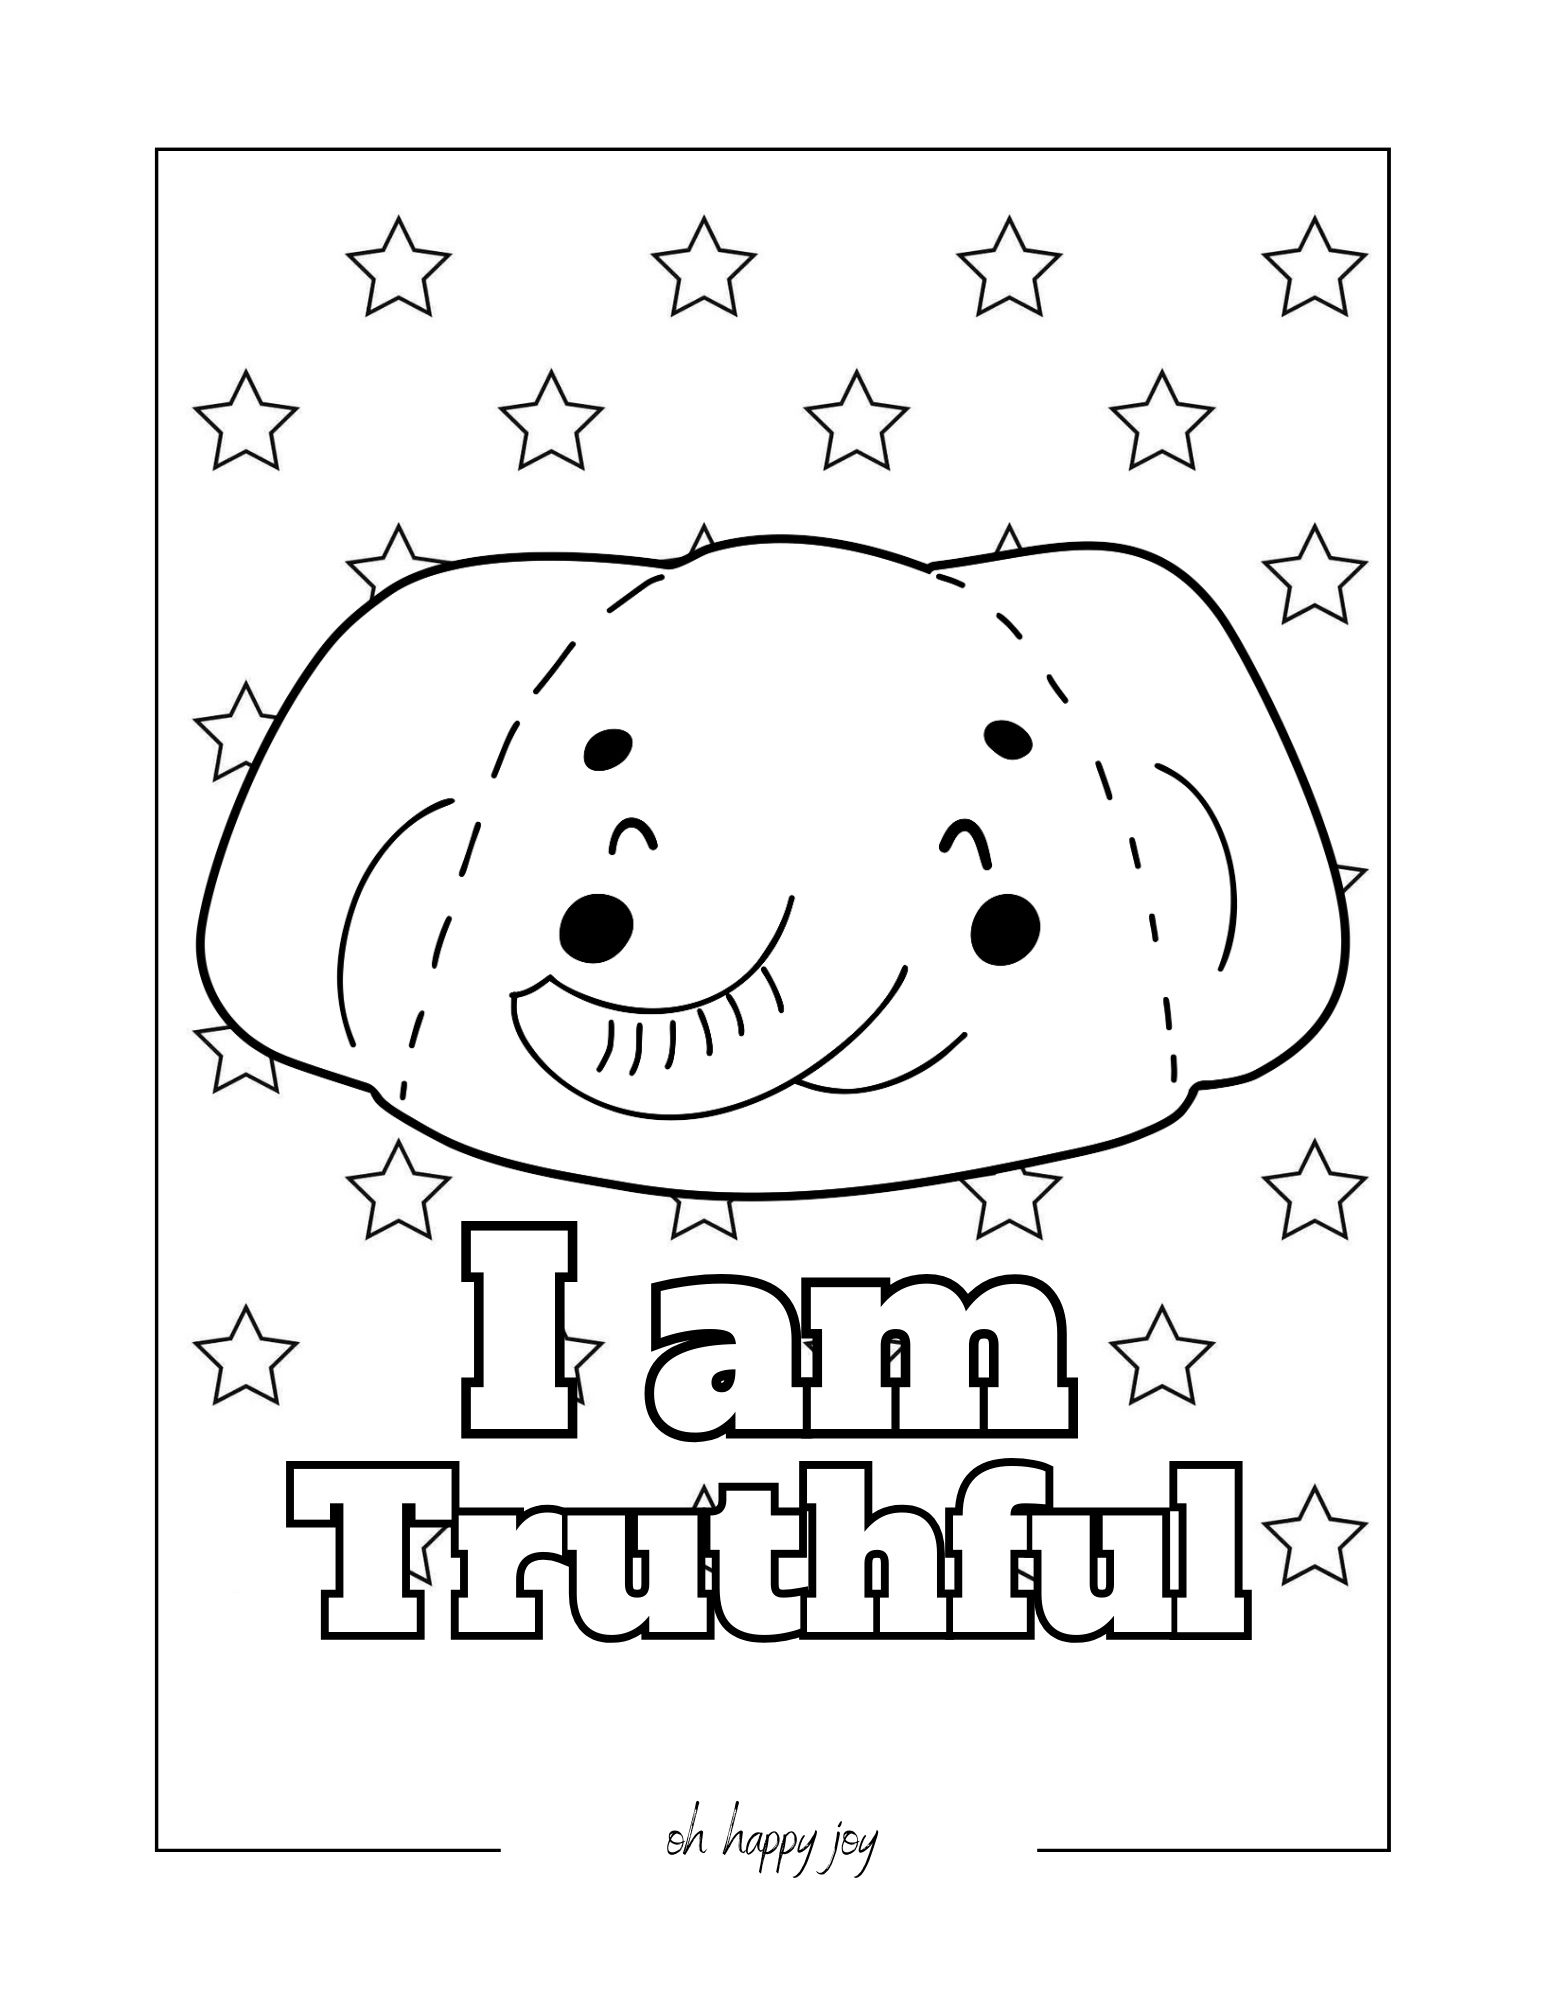 I am truthful affirmation coloring page